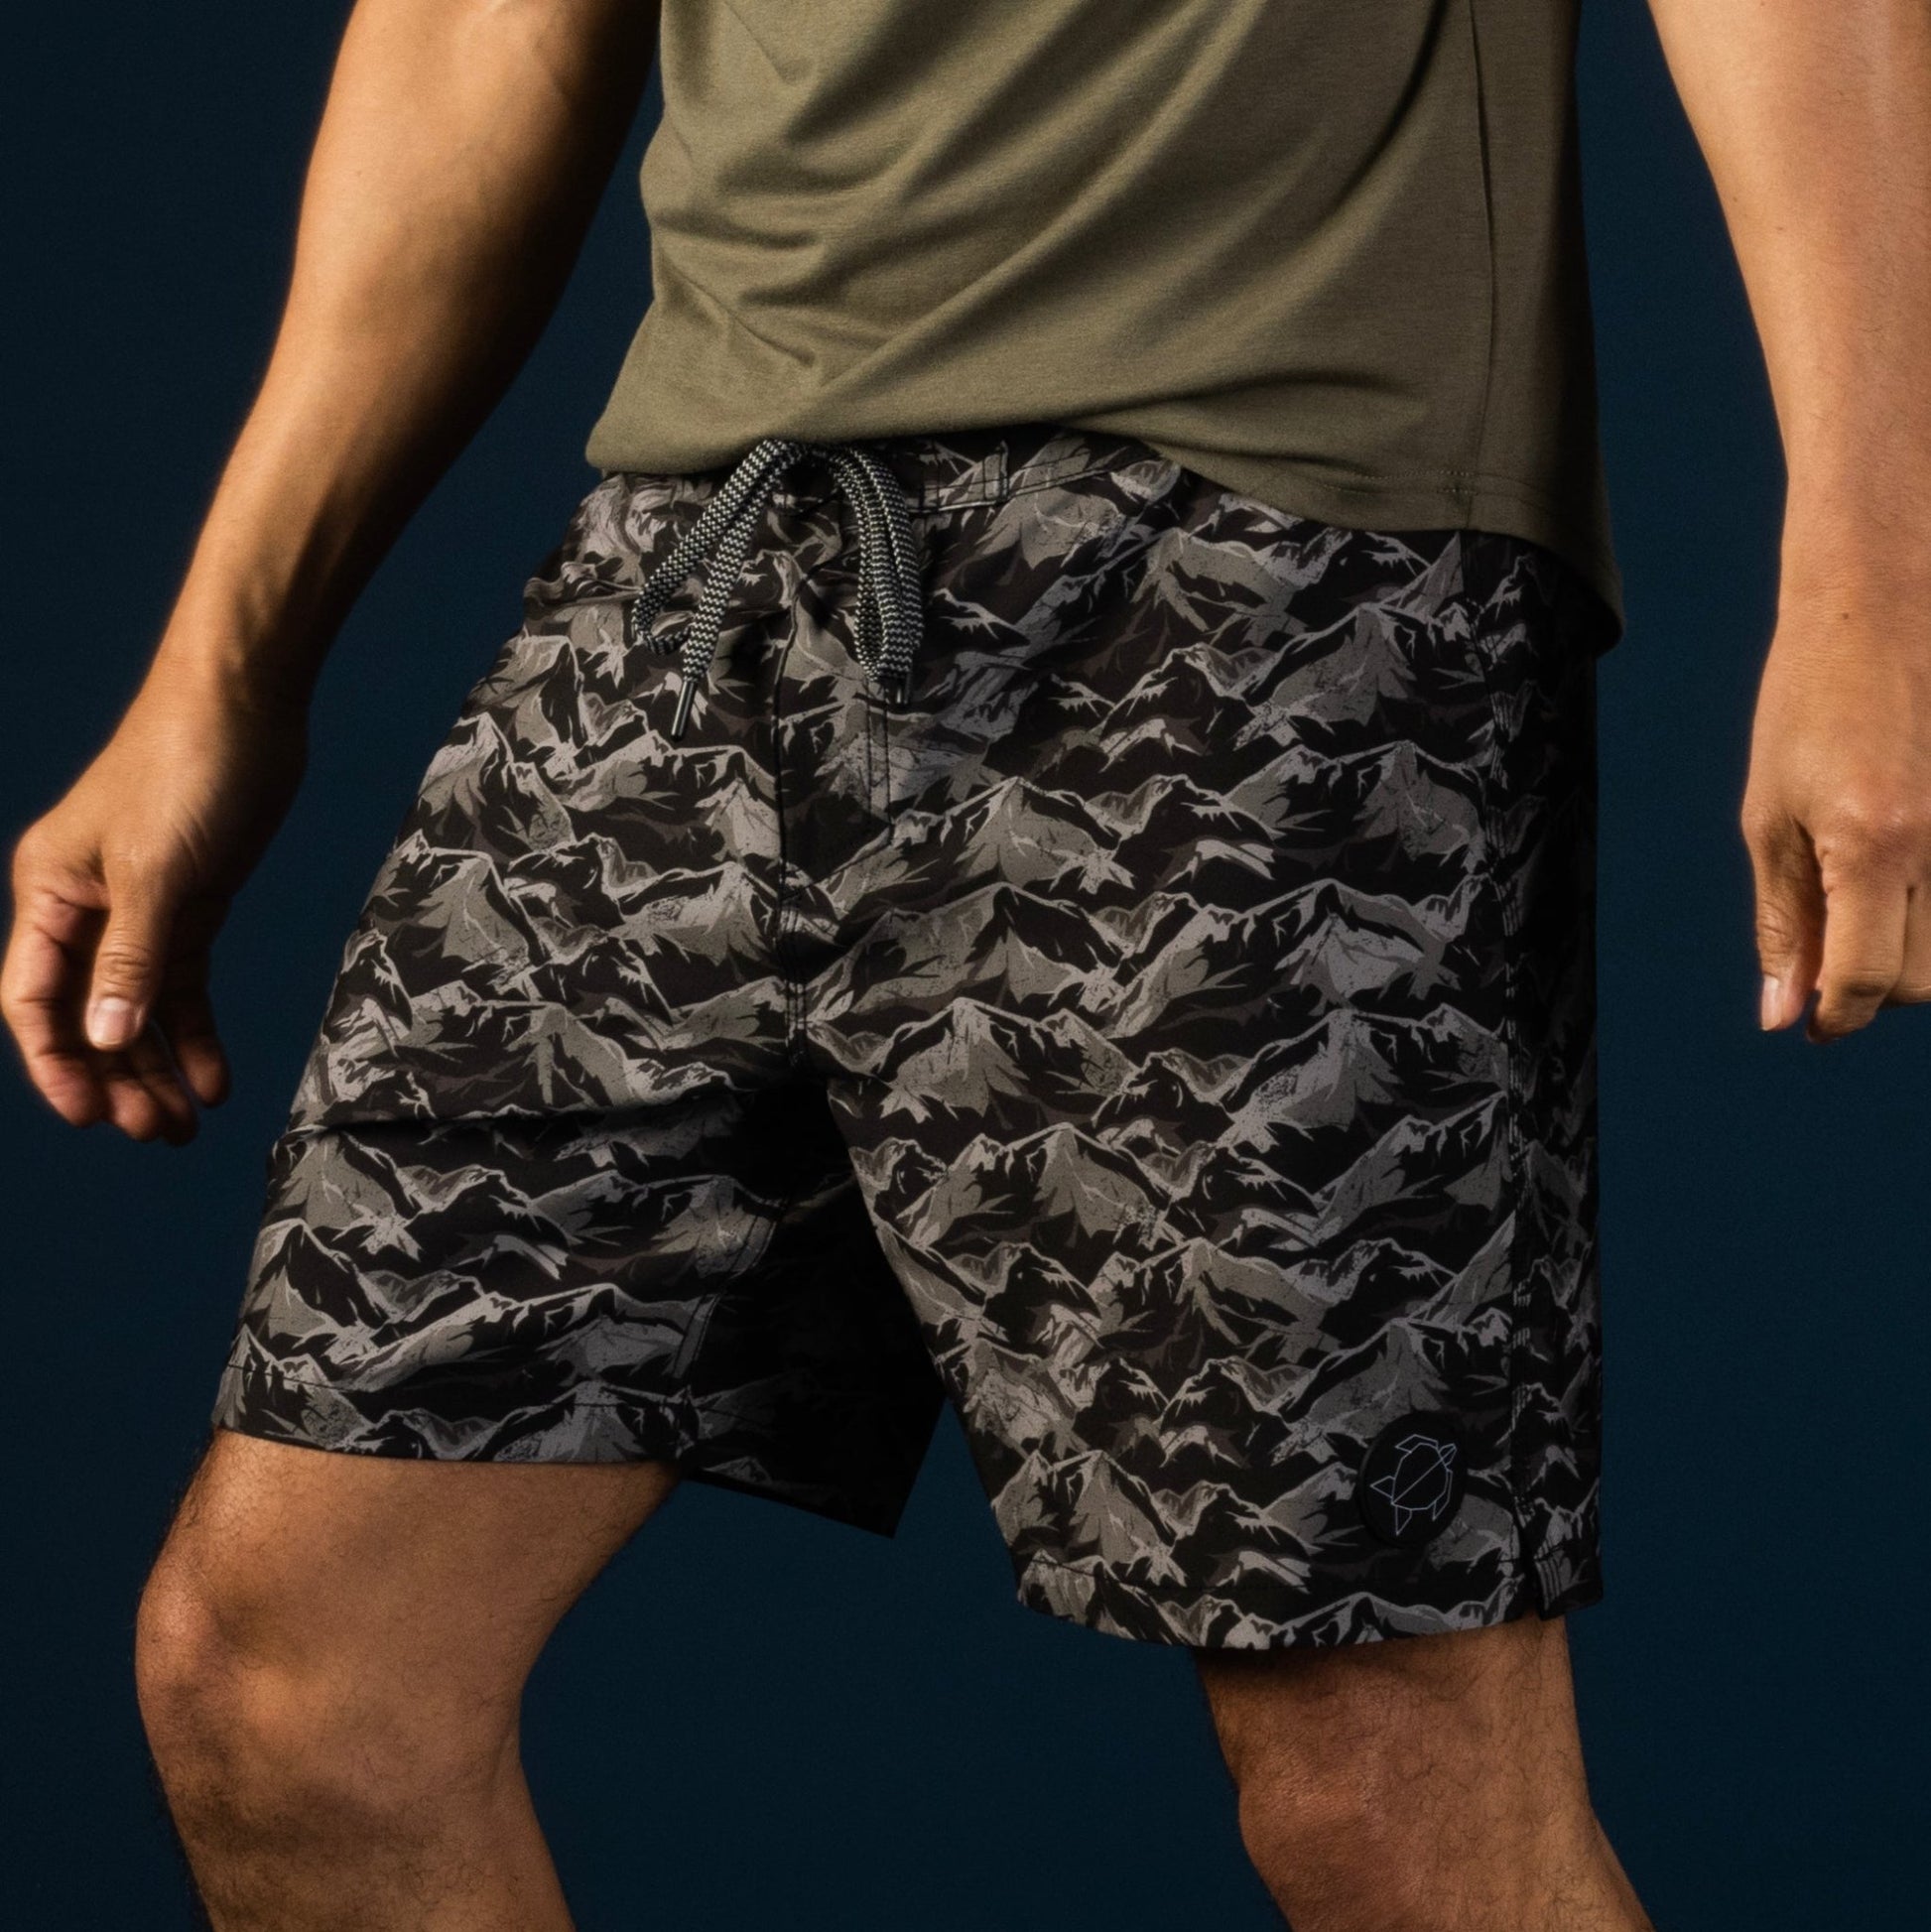 Men's Pro Performance Short (the ISLAND) - Limited Edition - LAIRD